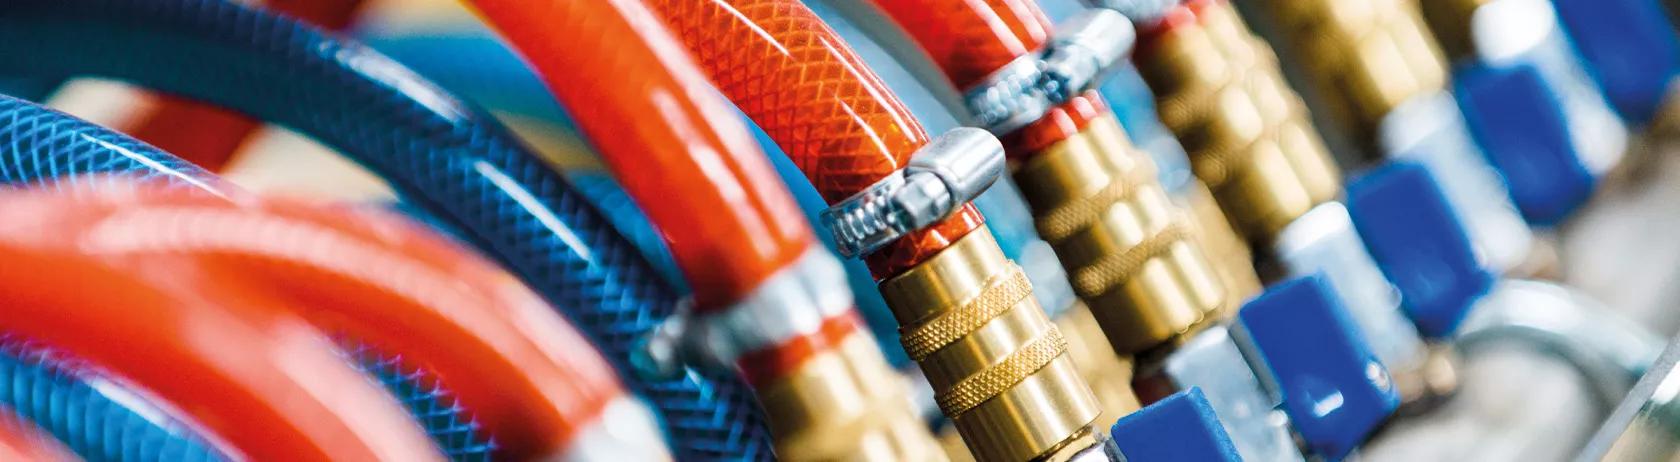 red and blue hydraulic hoses with fittings 